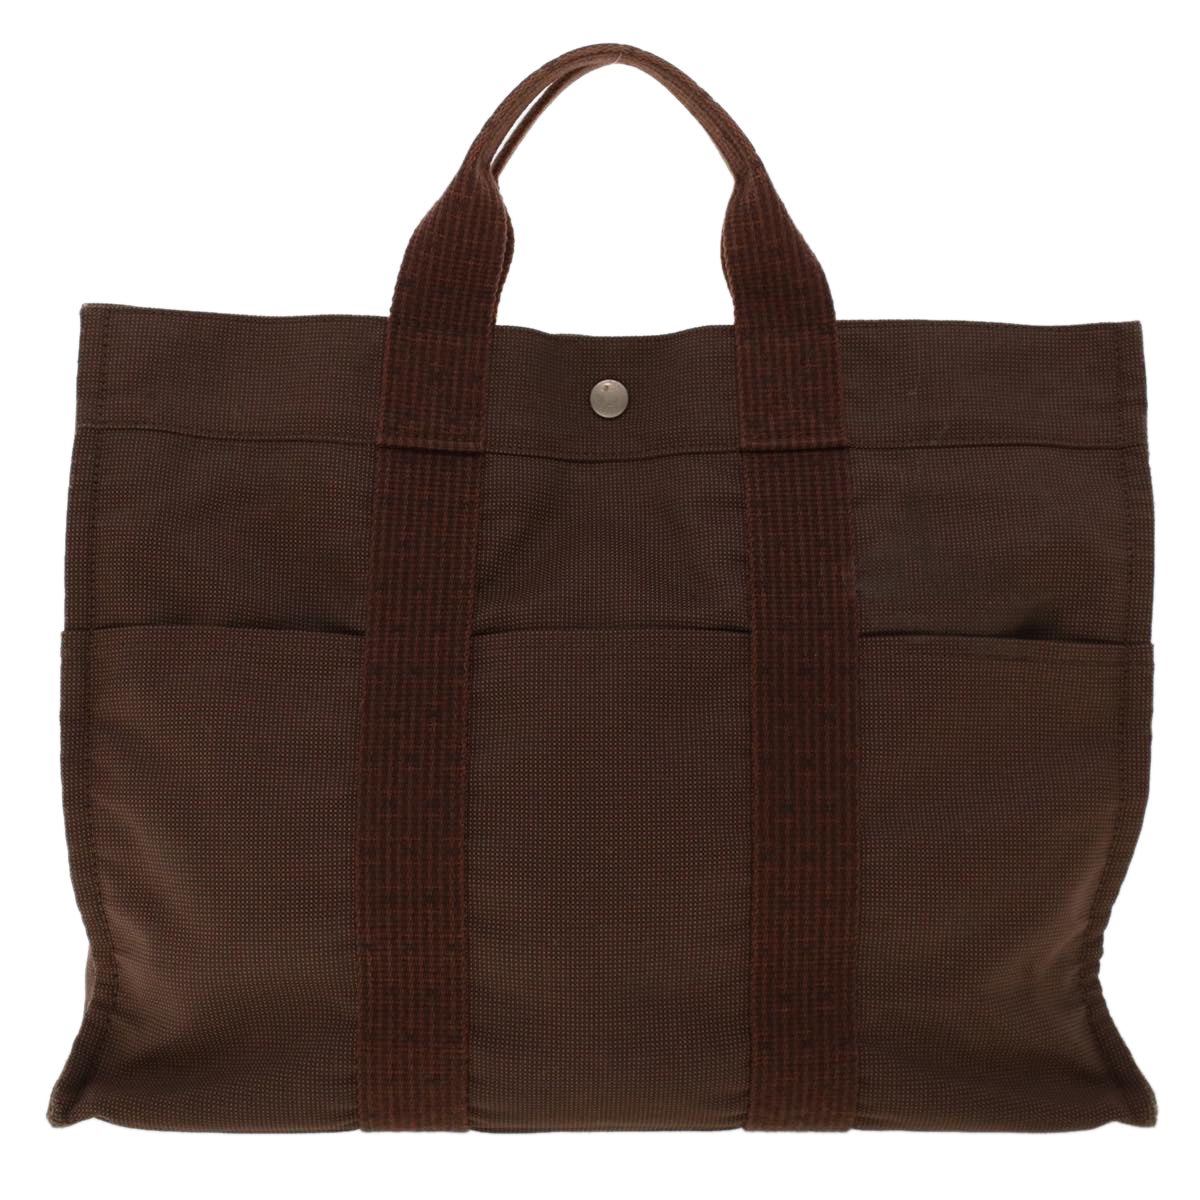 HERMES Her Line Tote Bag Canvas Brown Auth 46779